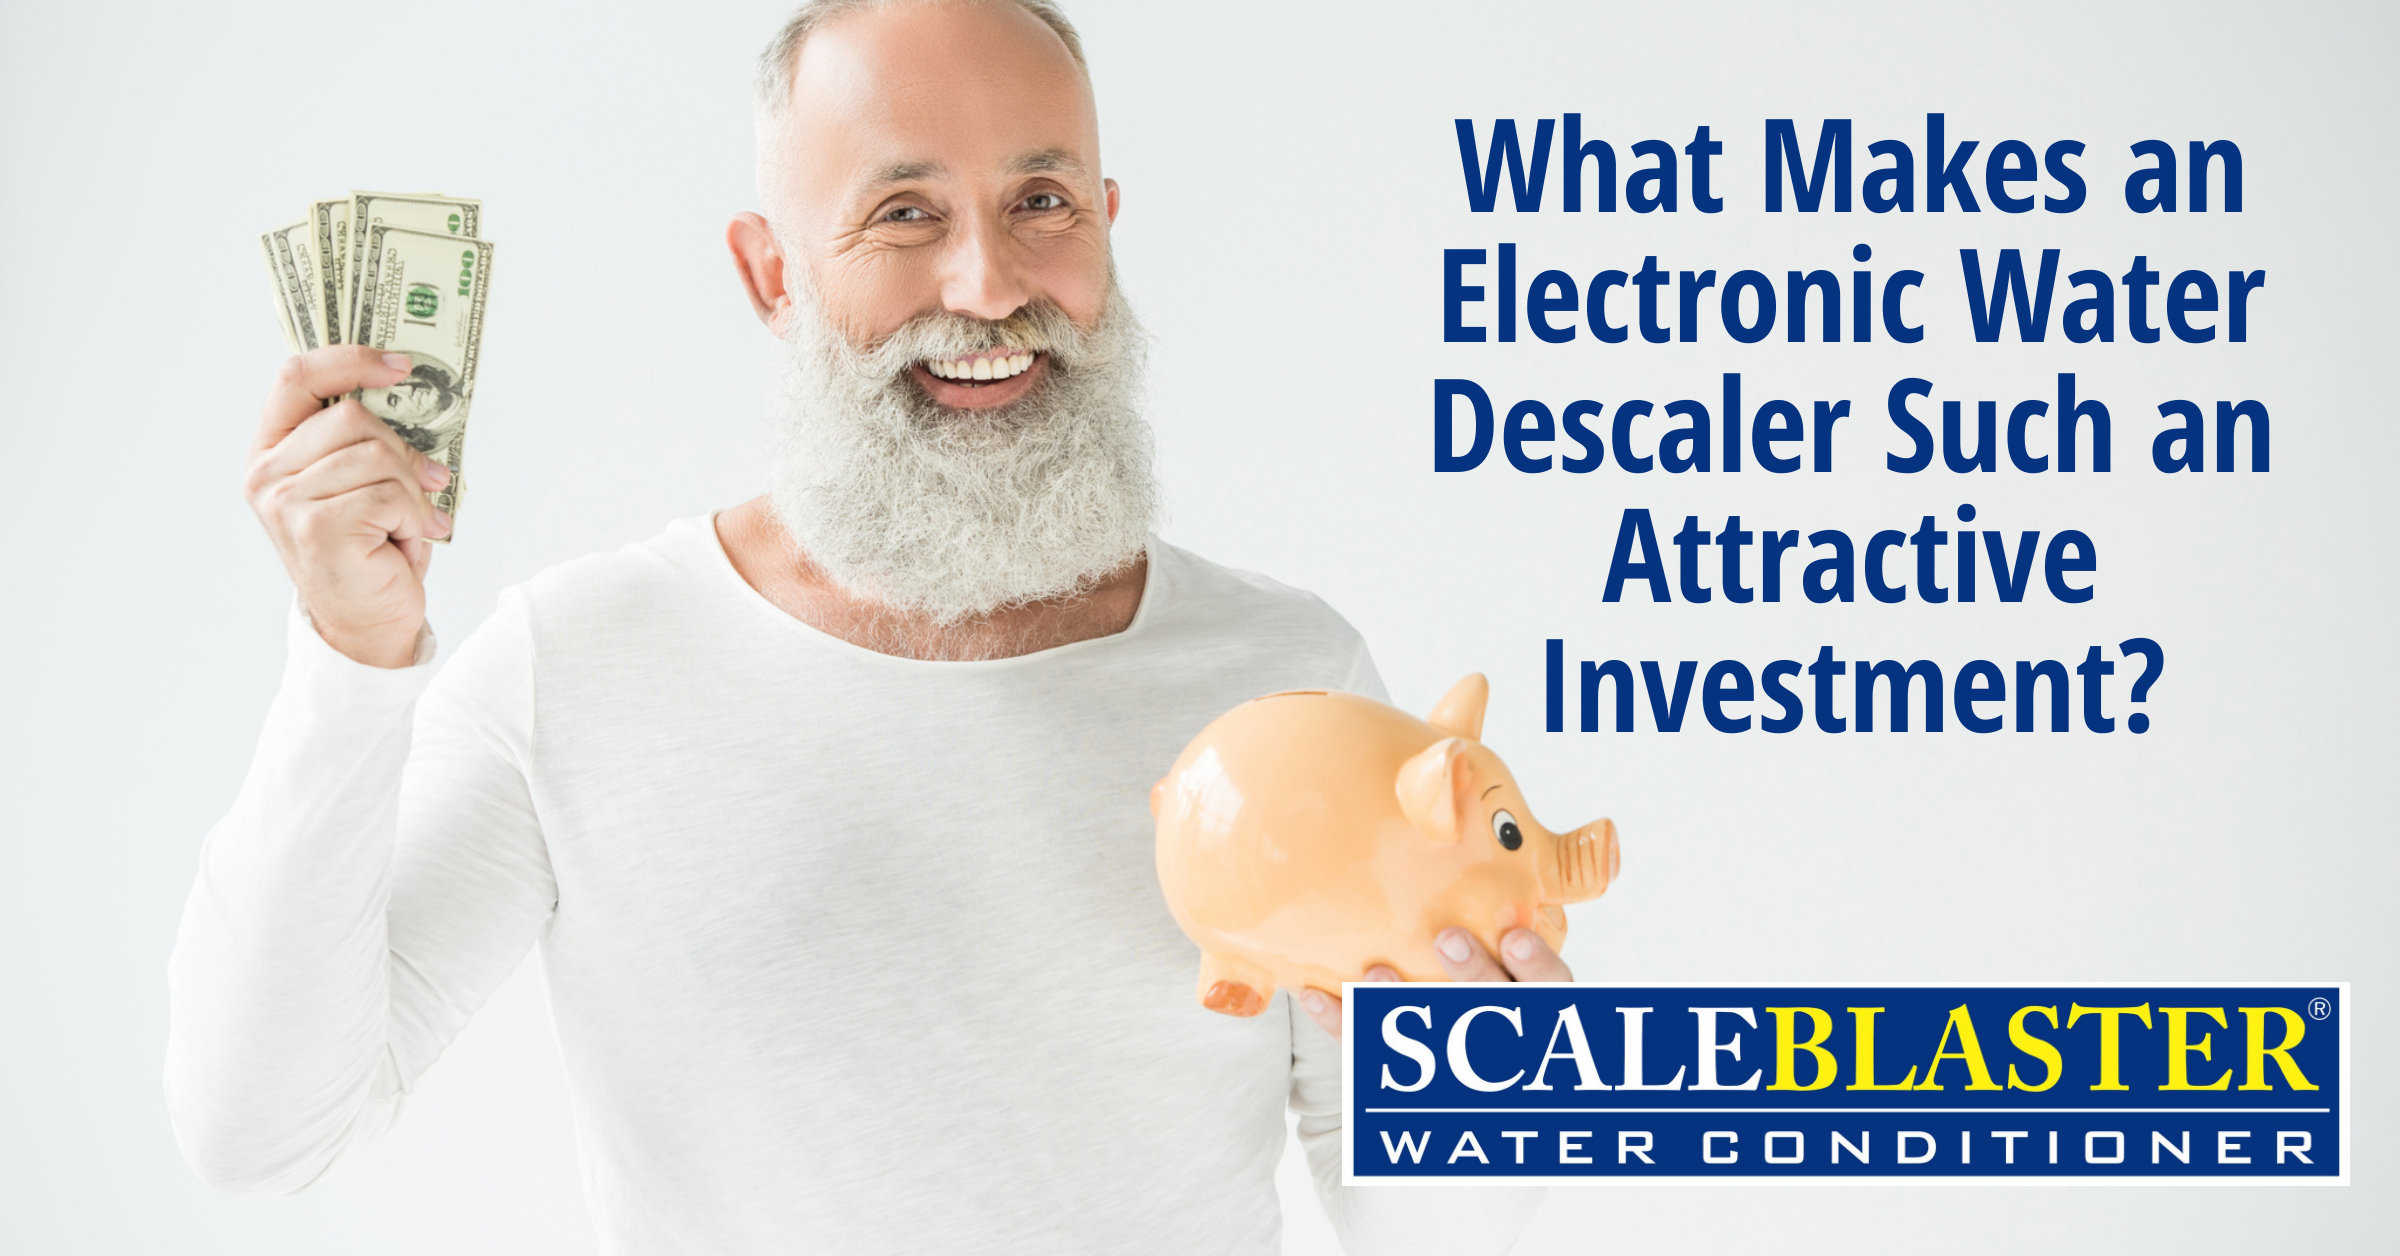 What Makes an Electronic Water Descaler Such an Attractive Investment - What Makes an Electronic Water Descaler Such an Attractive Investment?